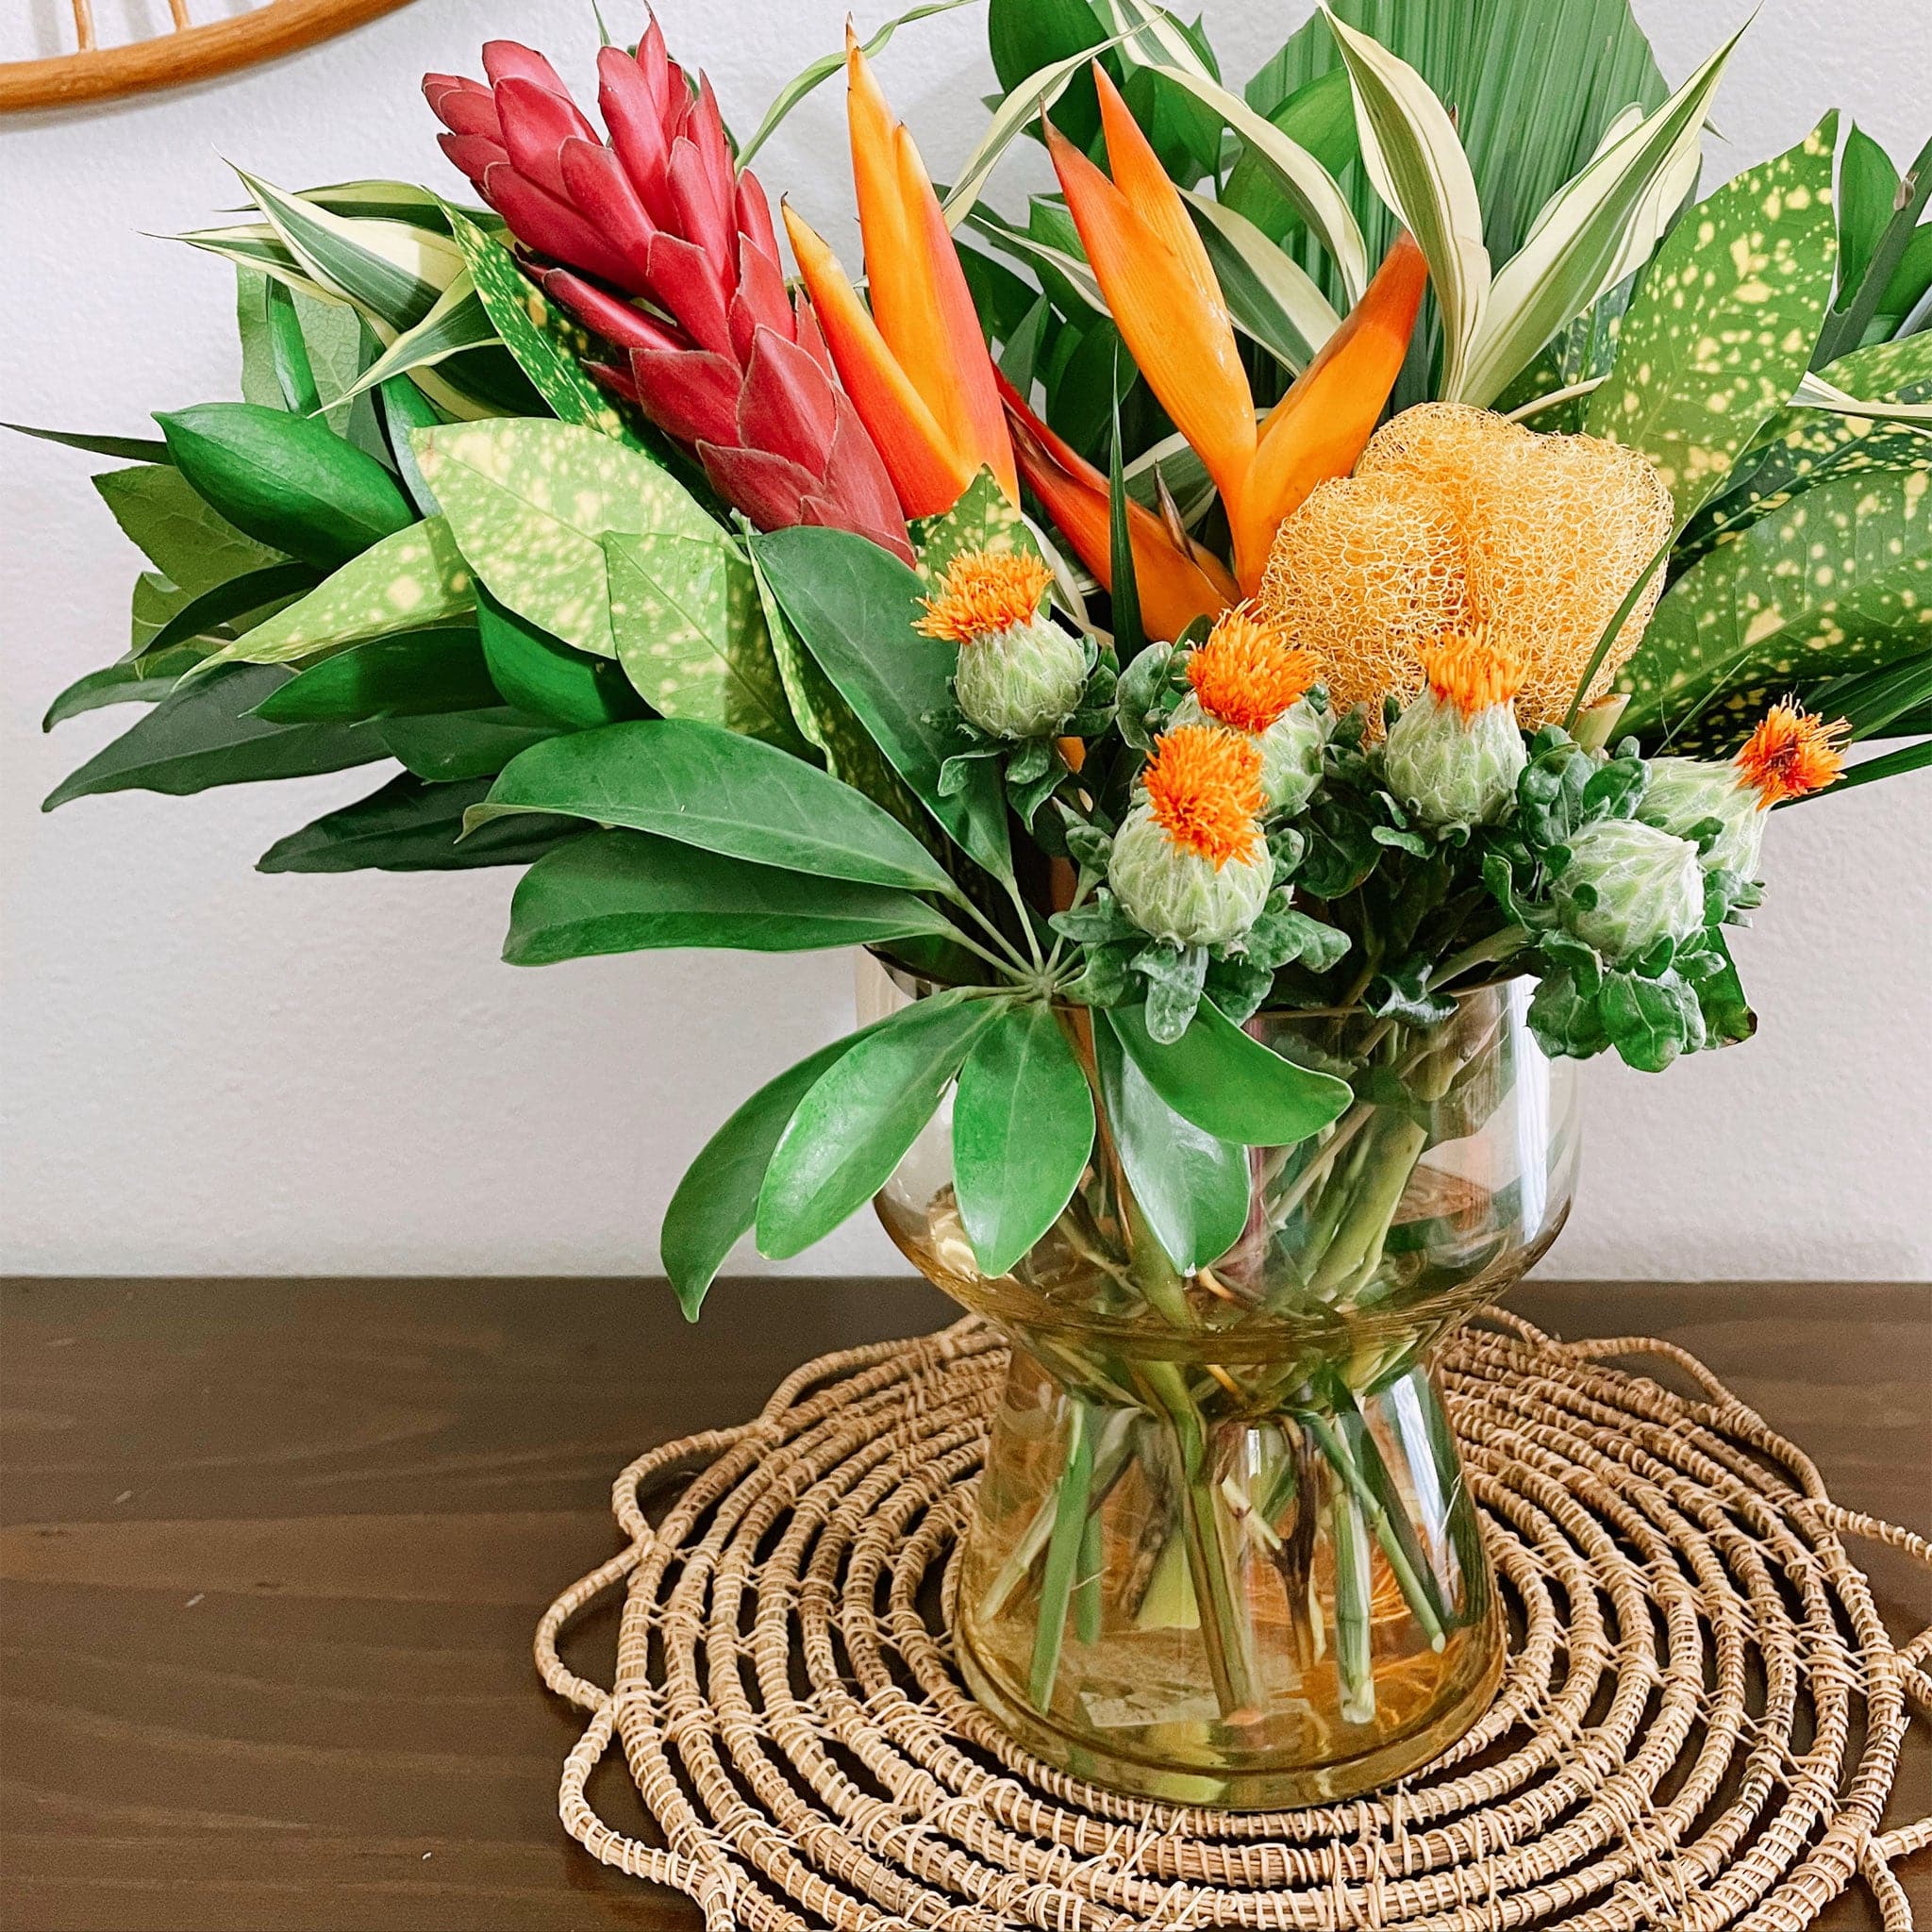 An amber colored compote style glass vase filled with a bouquet of tropical flowers on a woven placemat on a wood tabletop.